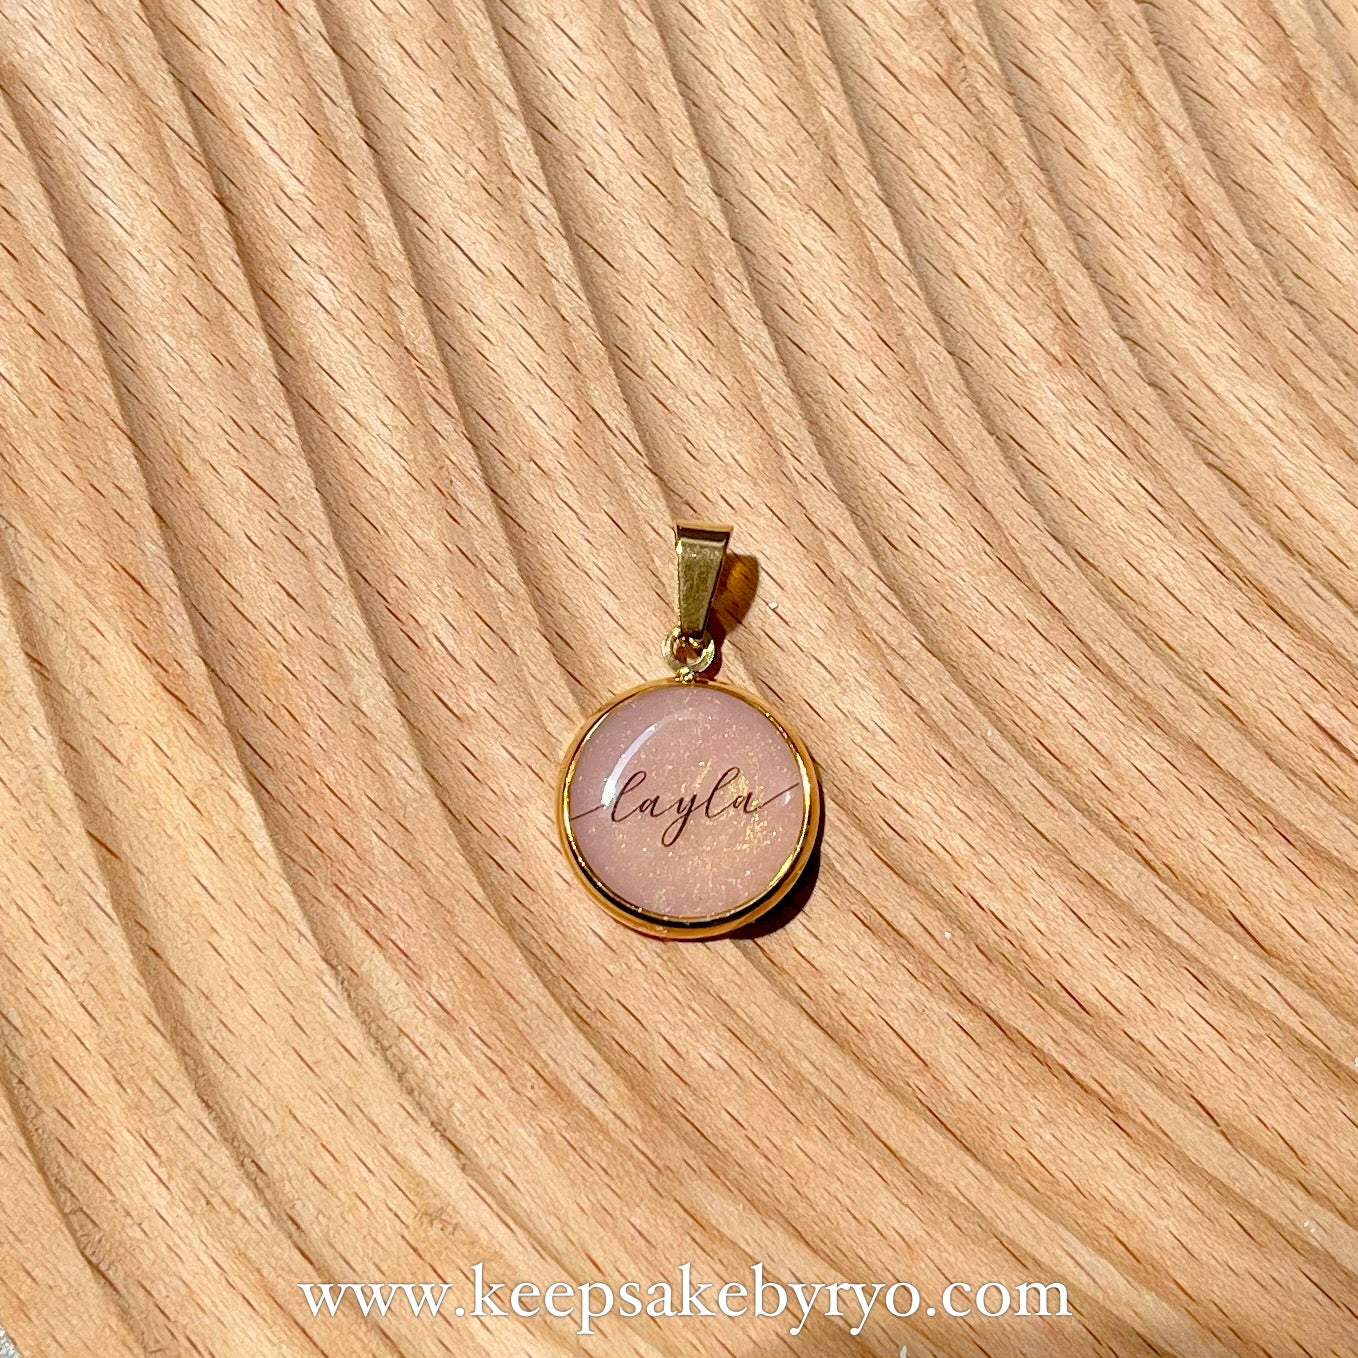 15MM CLASSIC ROUND BREASTMILK PENDANT WITH PEARL SHIMMER